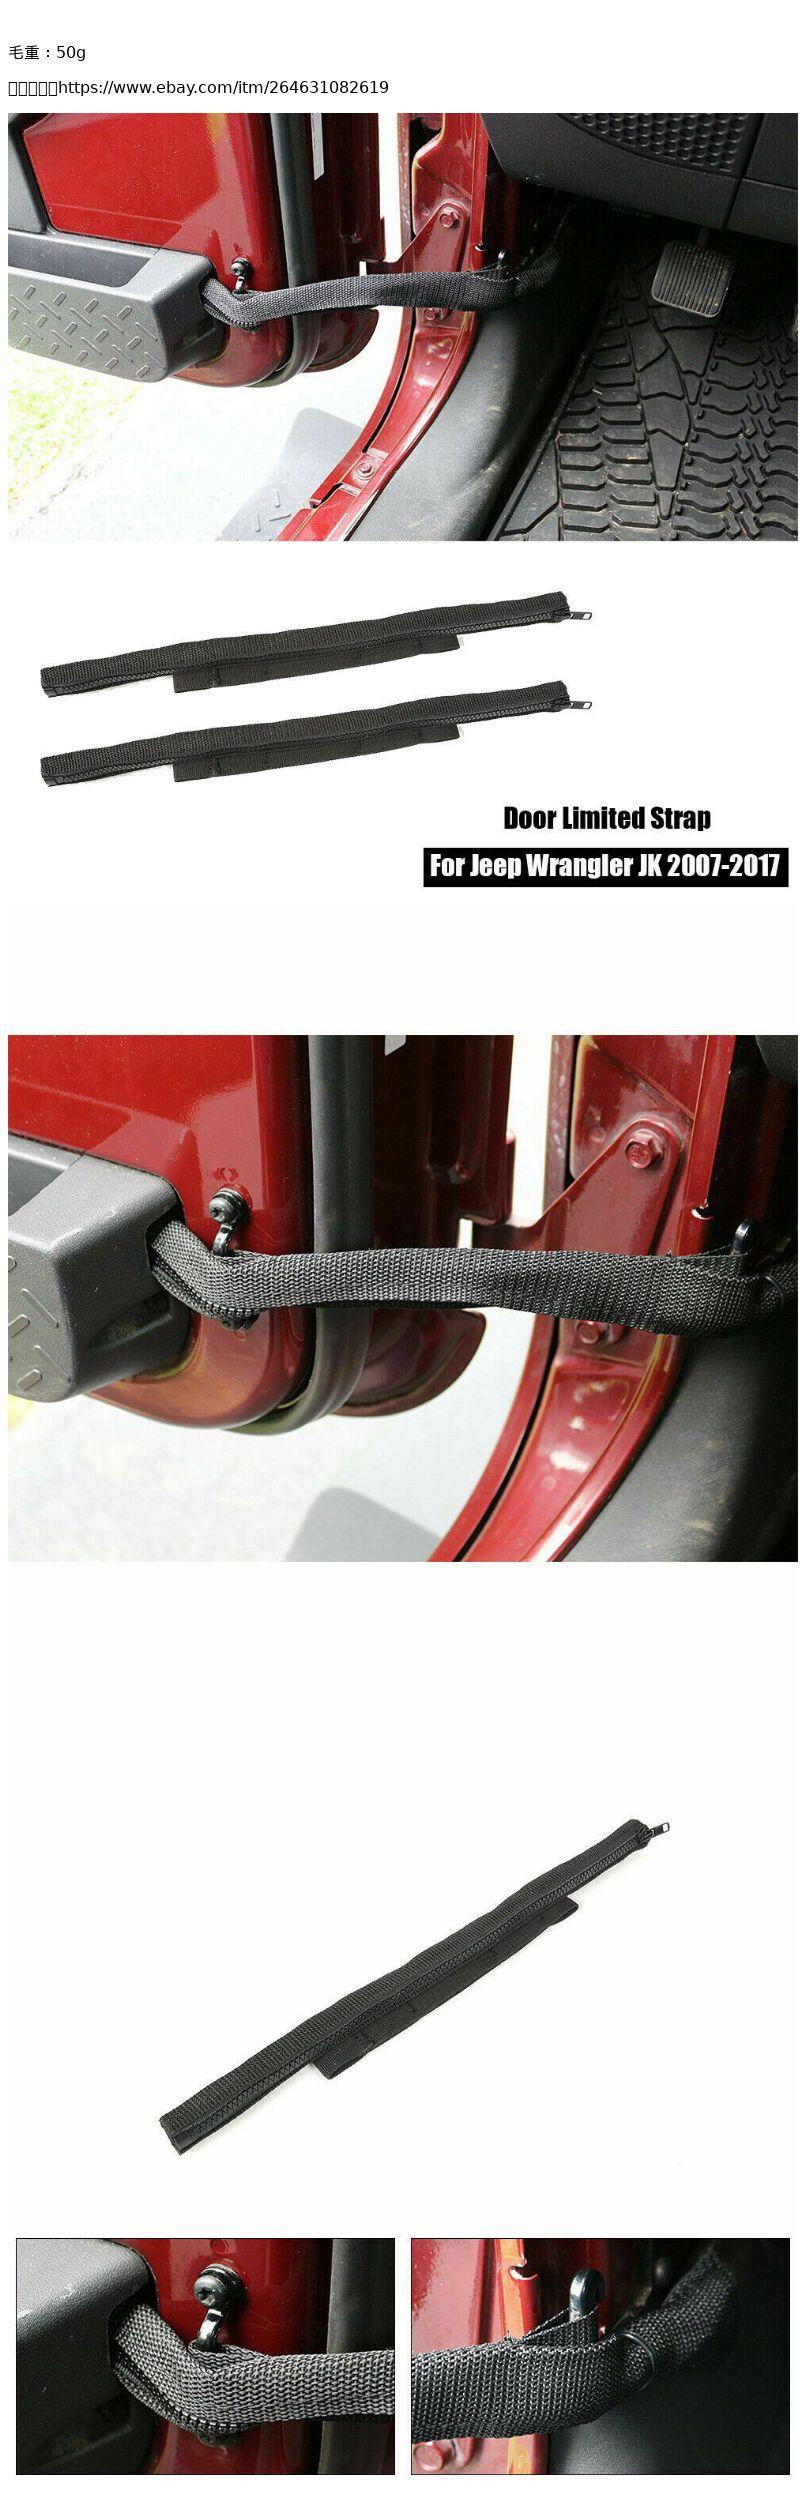 Mua 2 Pieces Door Limiting Straps for Jeep Wrangler JK 2007-17 Wiring  Protector tại Magideal2